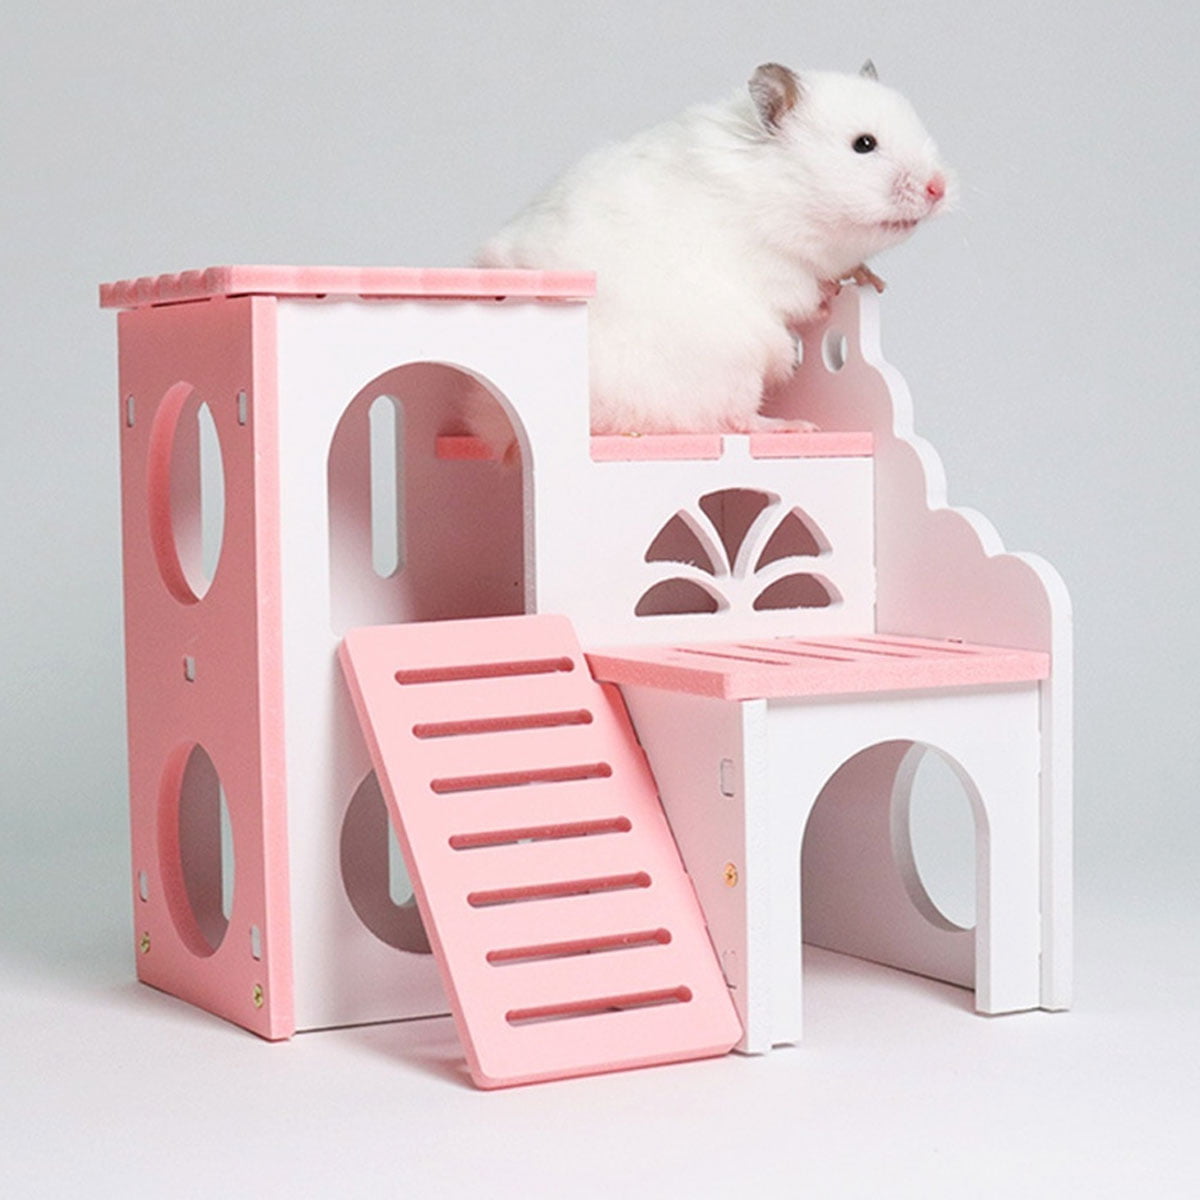 Pet Small Animal Hideout Hamster House Deluxe Two Layers Squirrel Hedgehog Chinchilla Bed House Cage Nest Hamster Accessories Pink Hamster House Nest